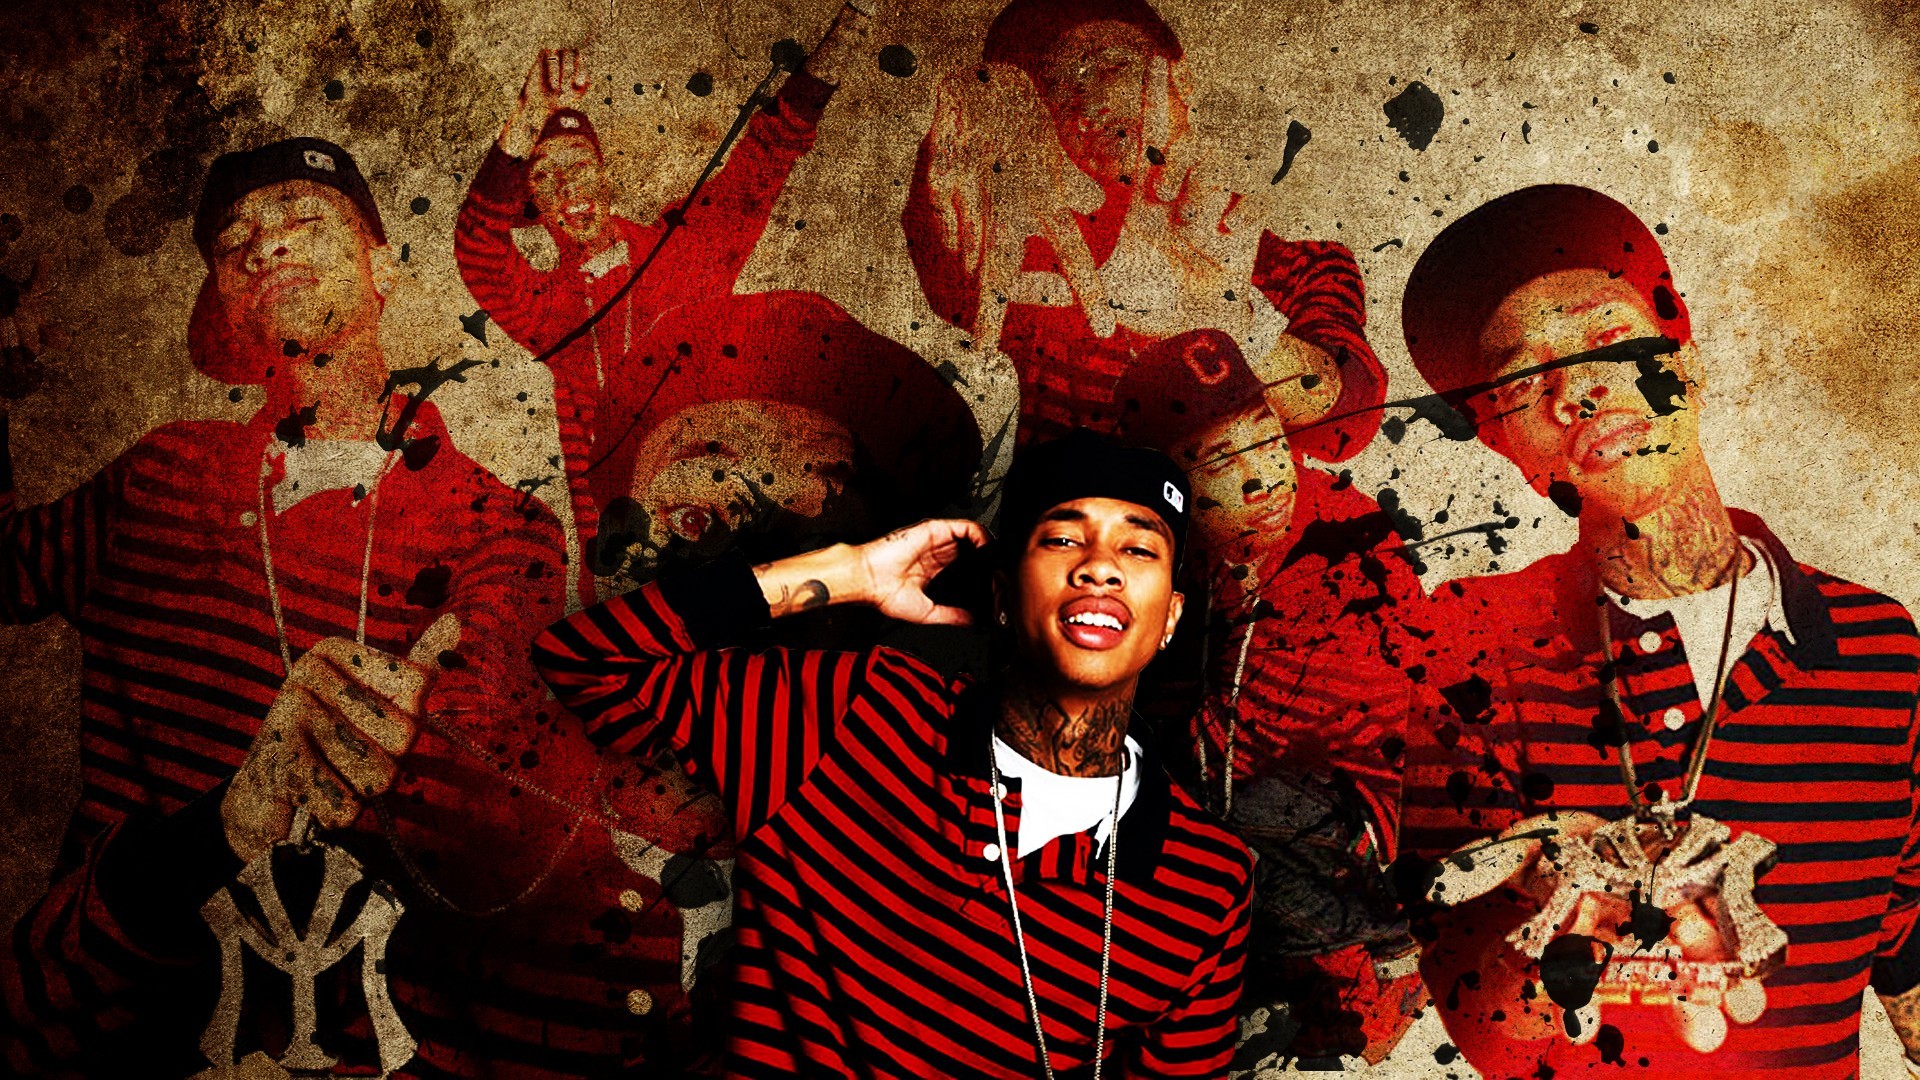 1920x1080 Download Tyga HD 16 background for your phone iPhone android 